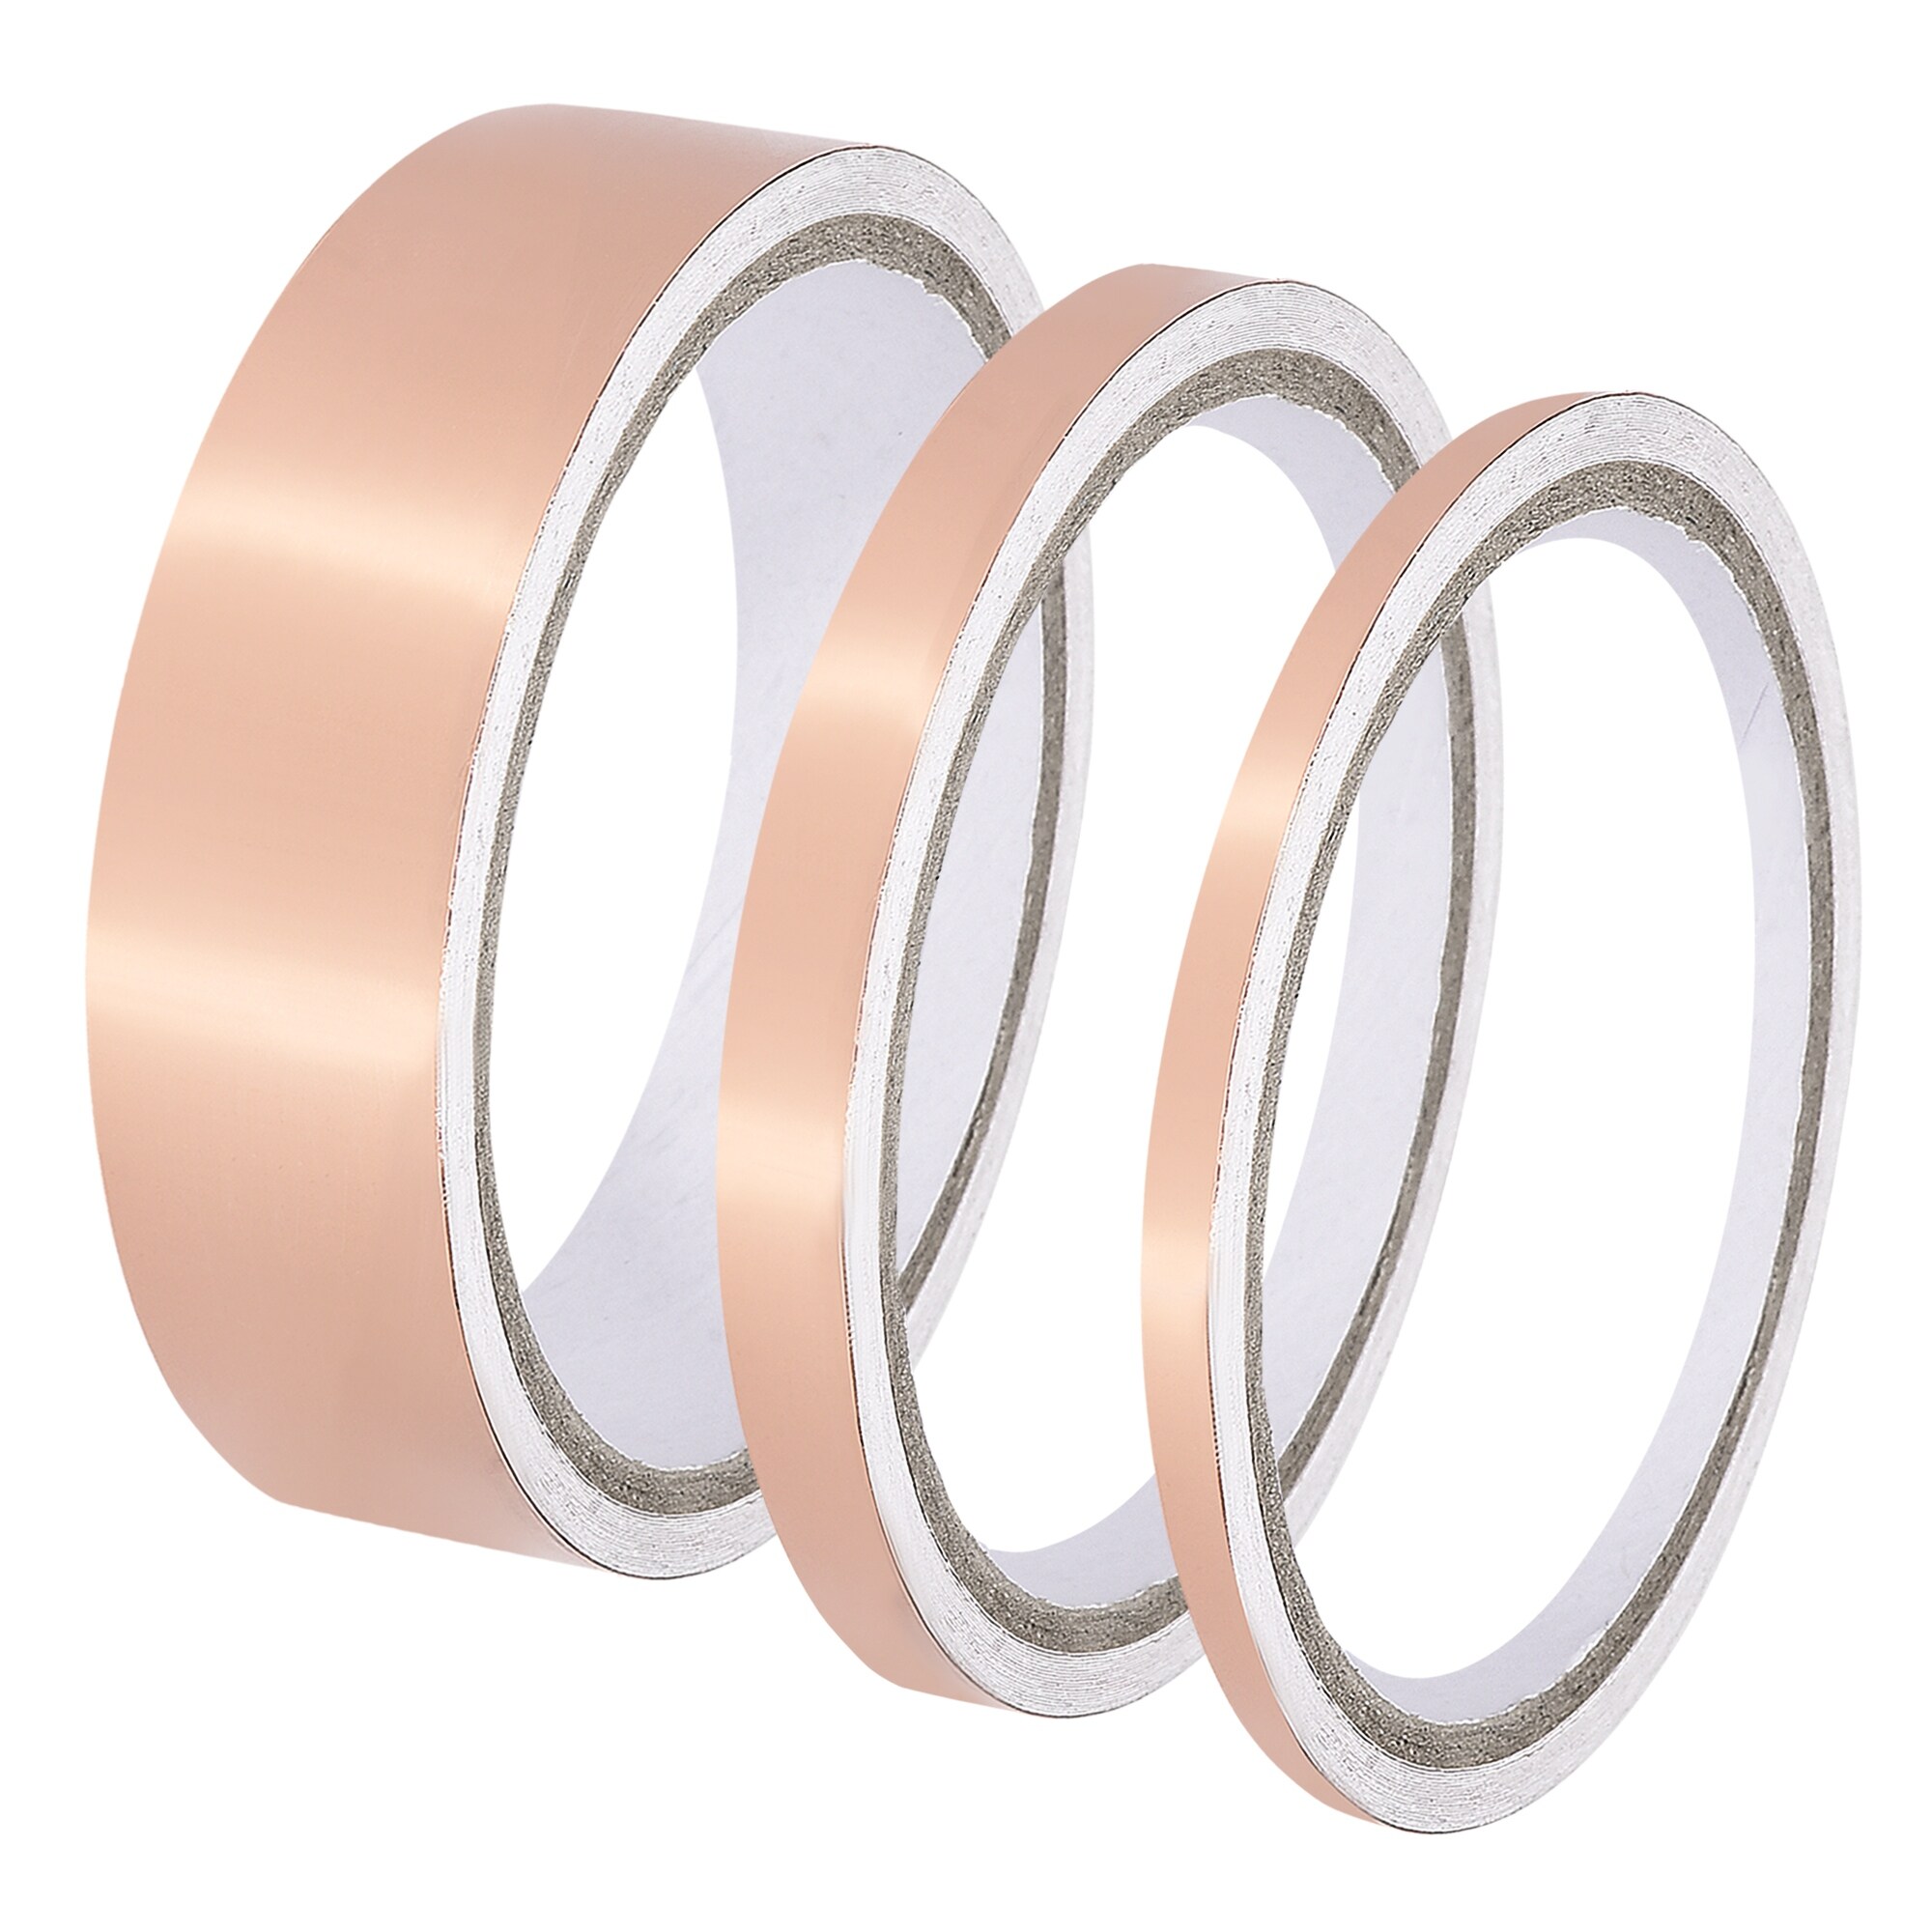 Double Sided Conductive Tape Copper Foil Tape 10mm x 20m/65.6ft